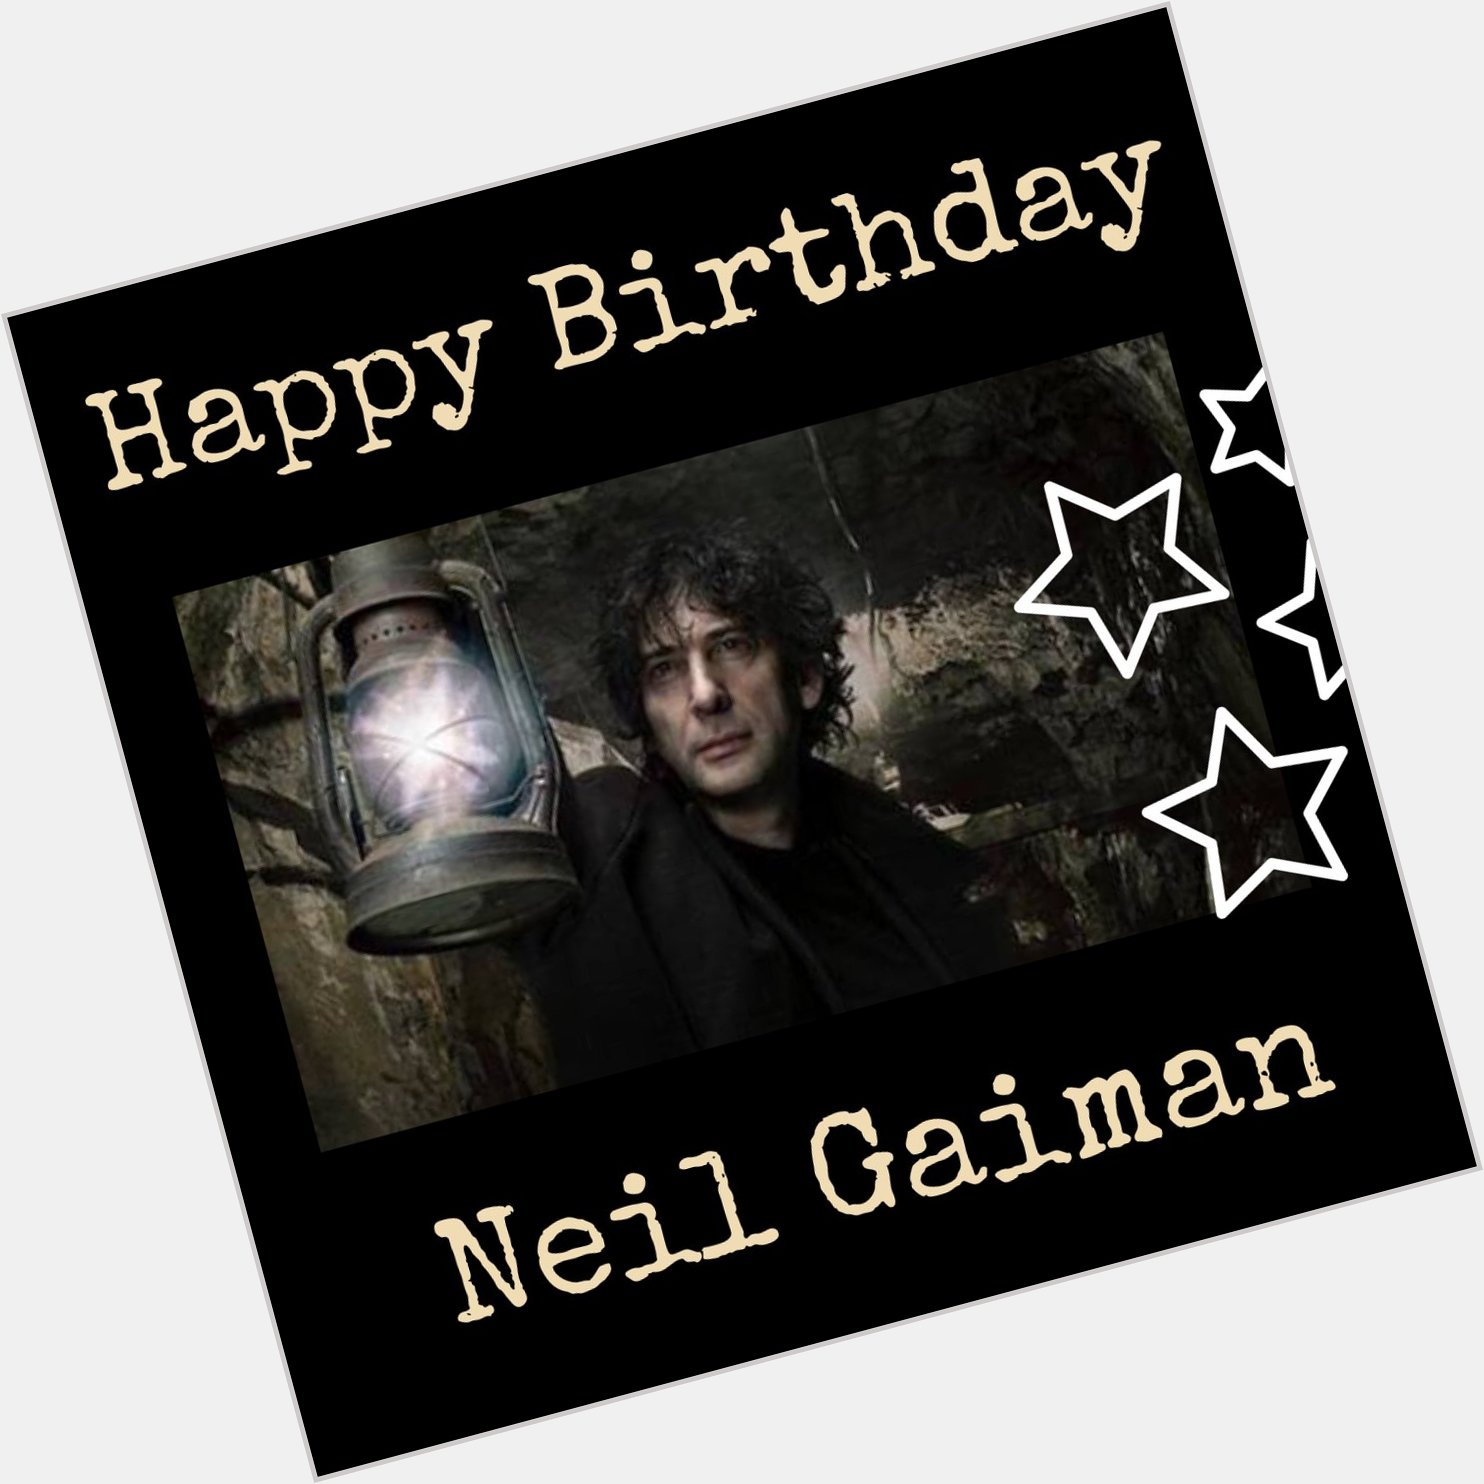  Today is Neil Gaiman\s birthday! Join us in wishing him a happy birthday :) 